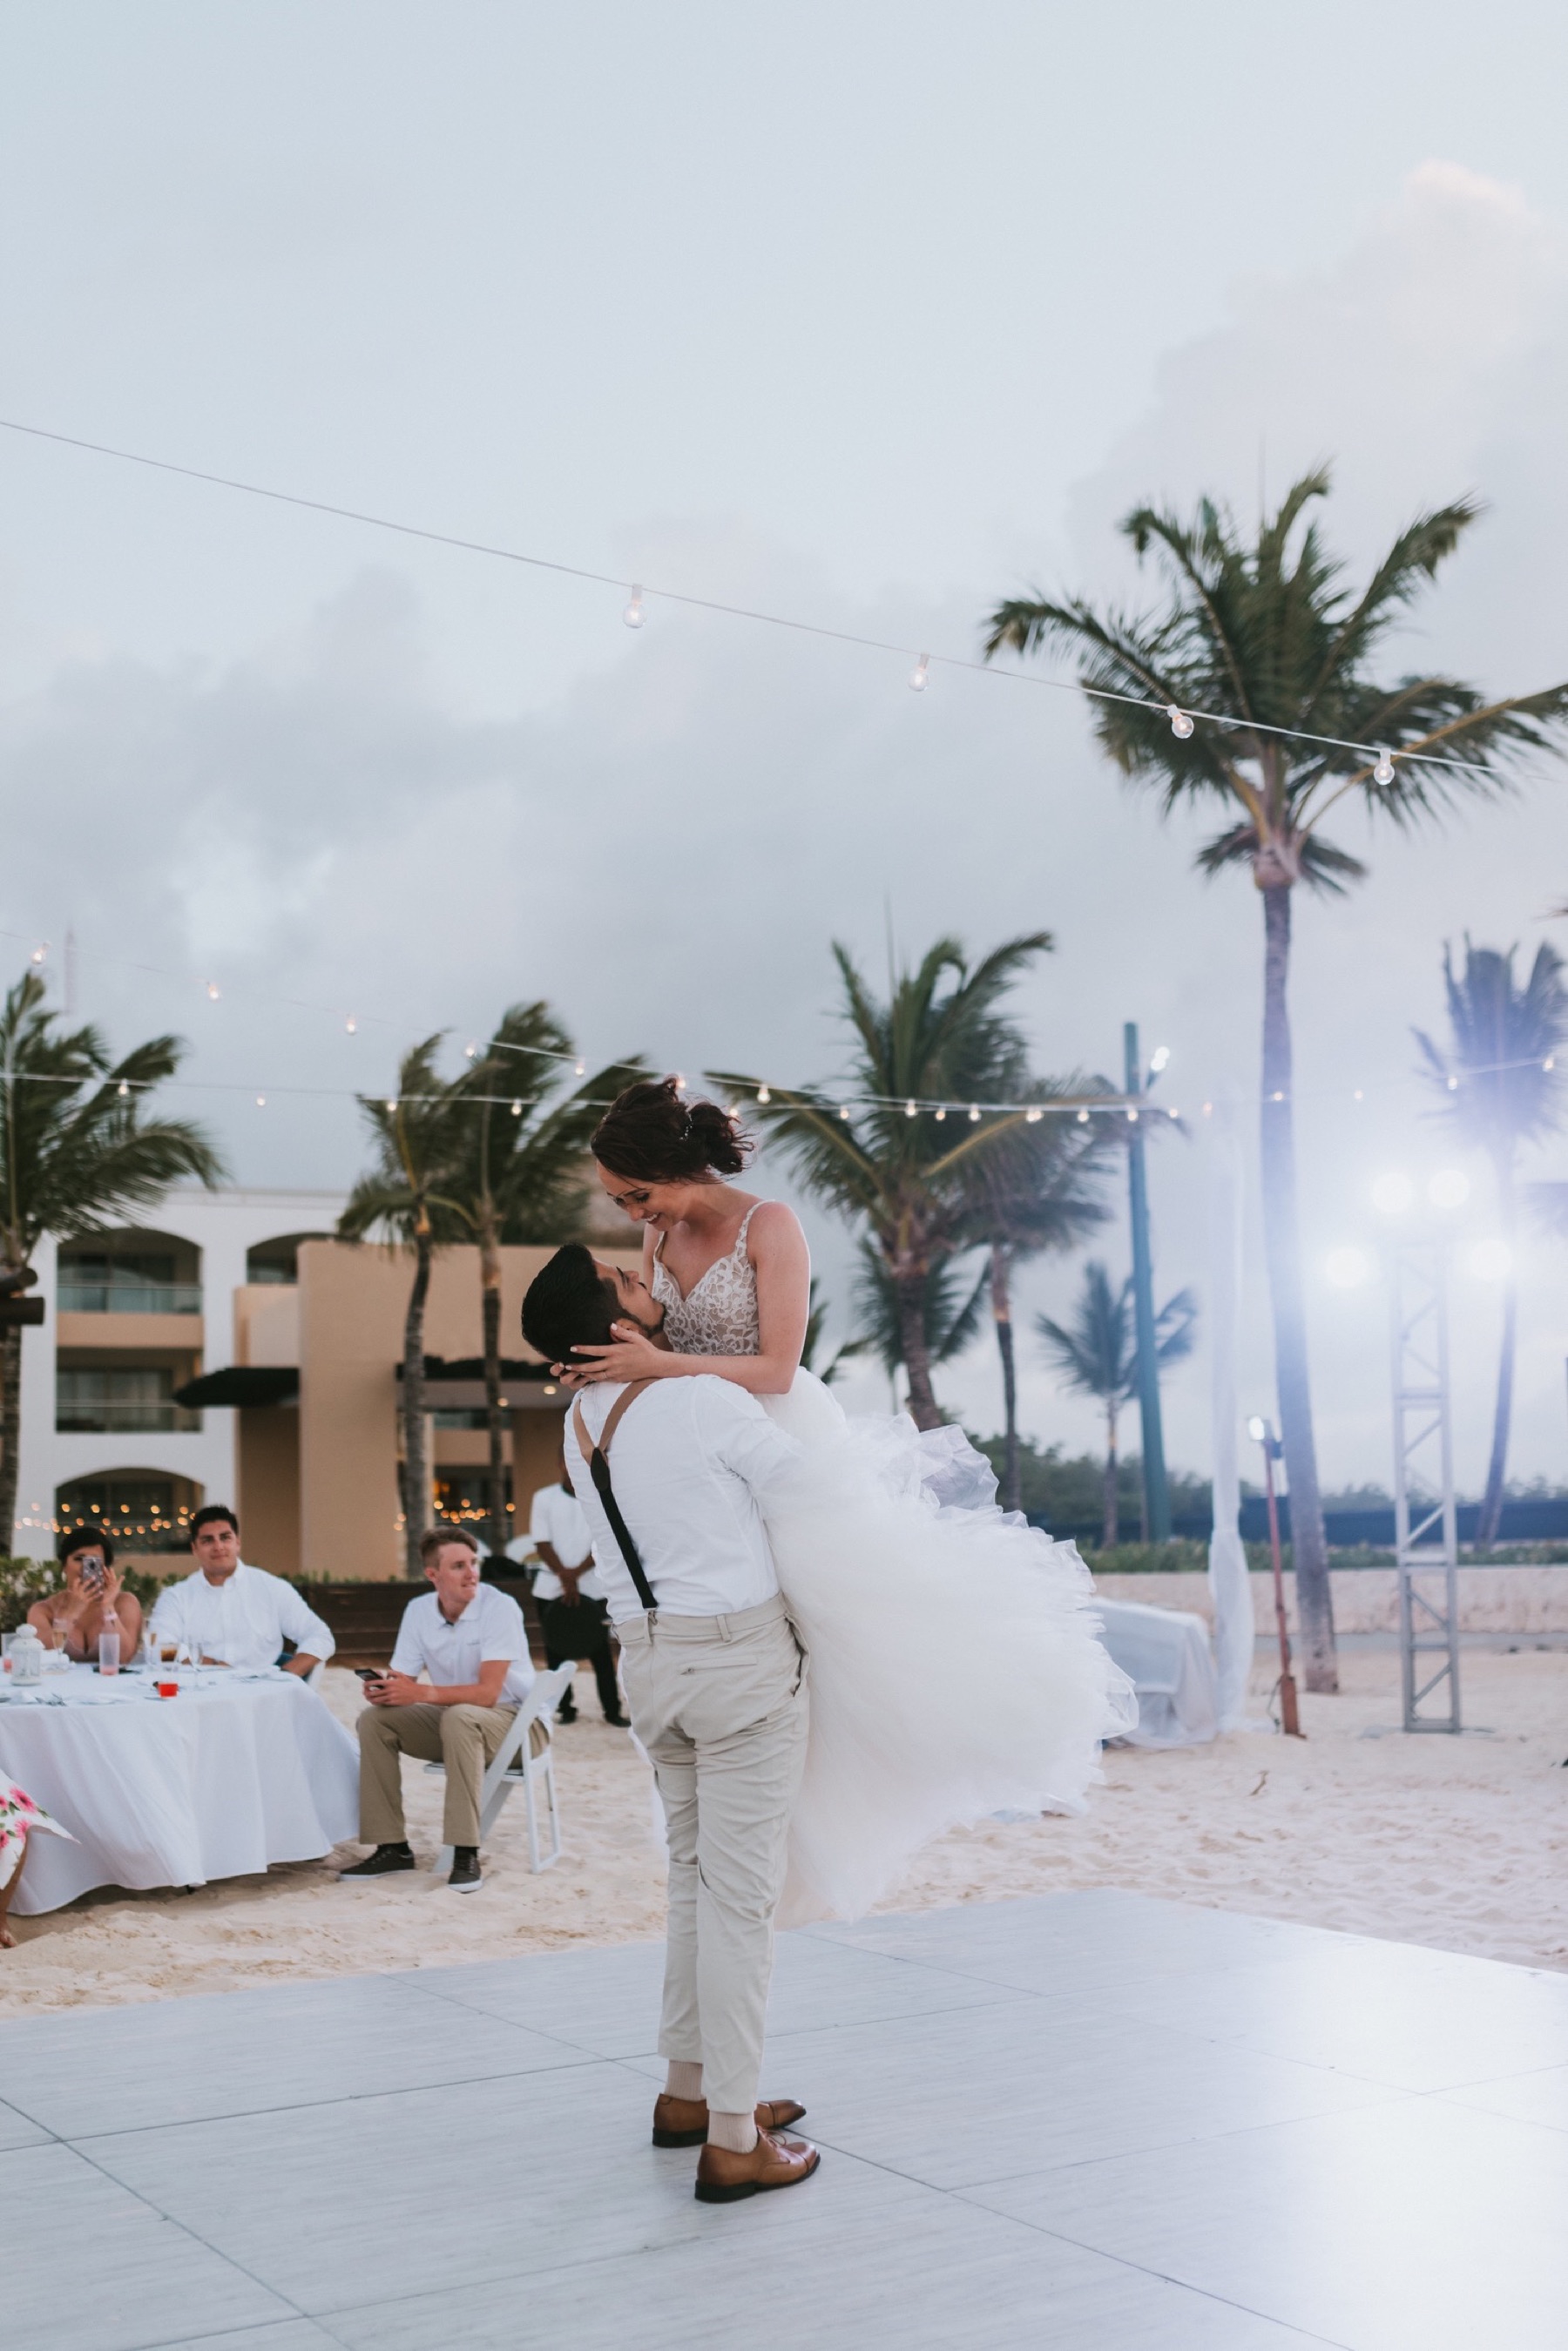 Groom picking bride up during first dance with dj lights in the background at hard rock punta cana